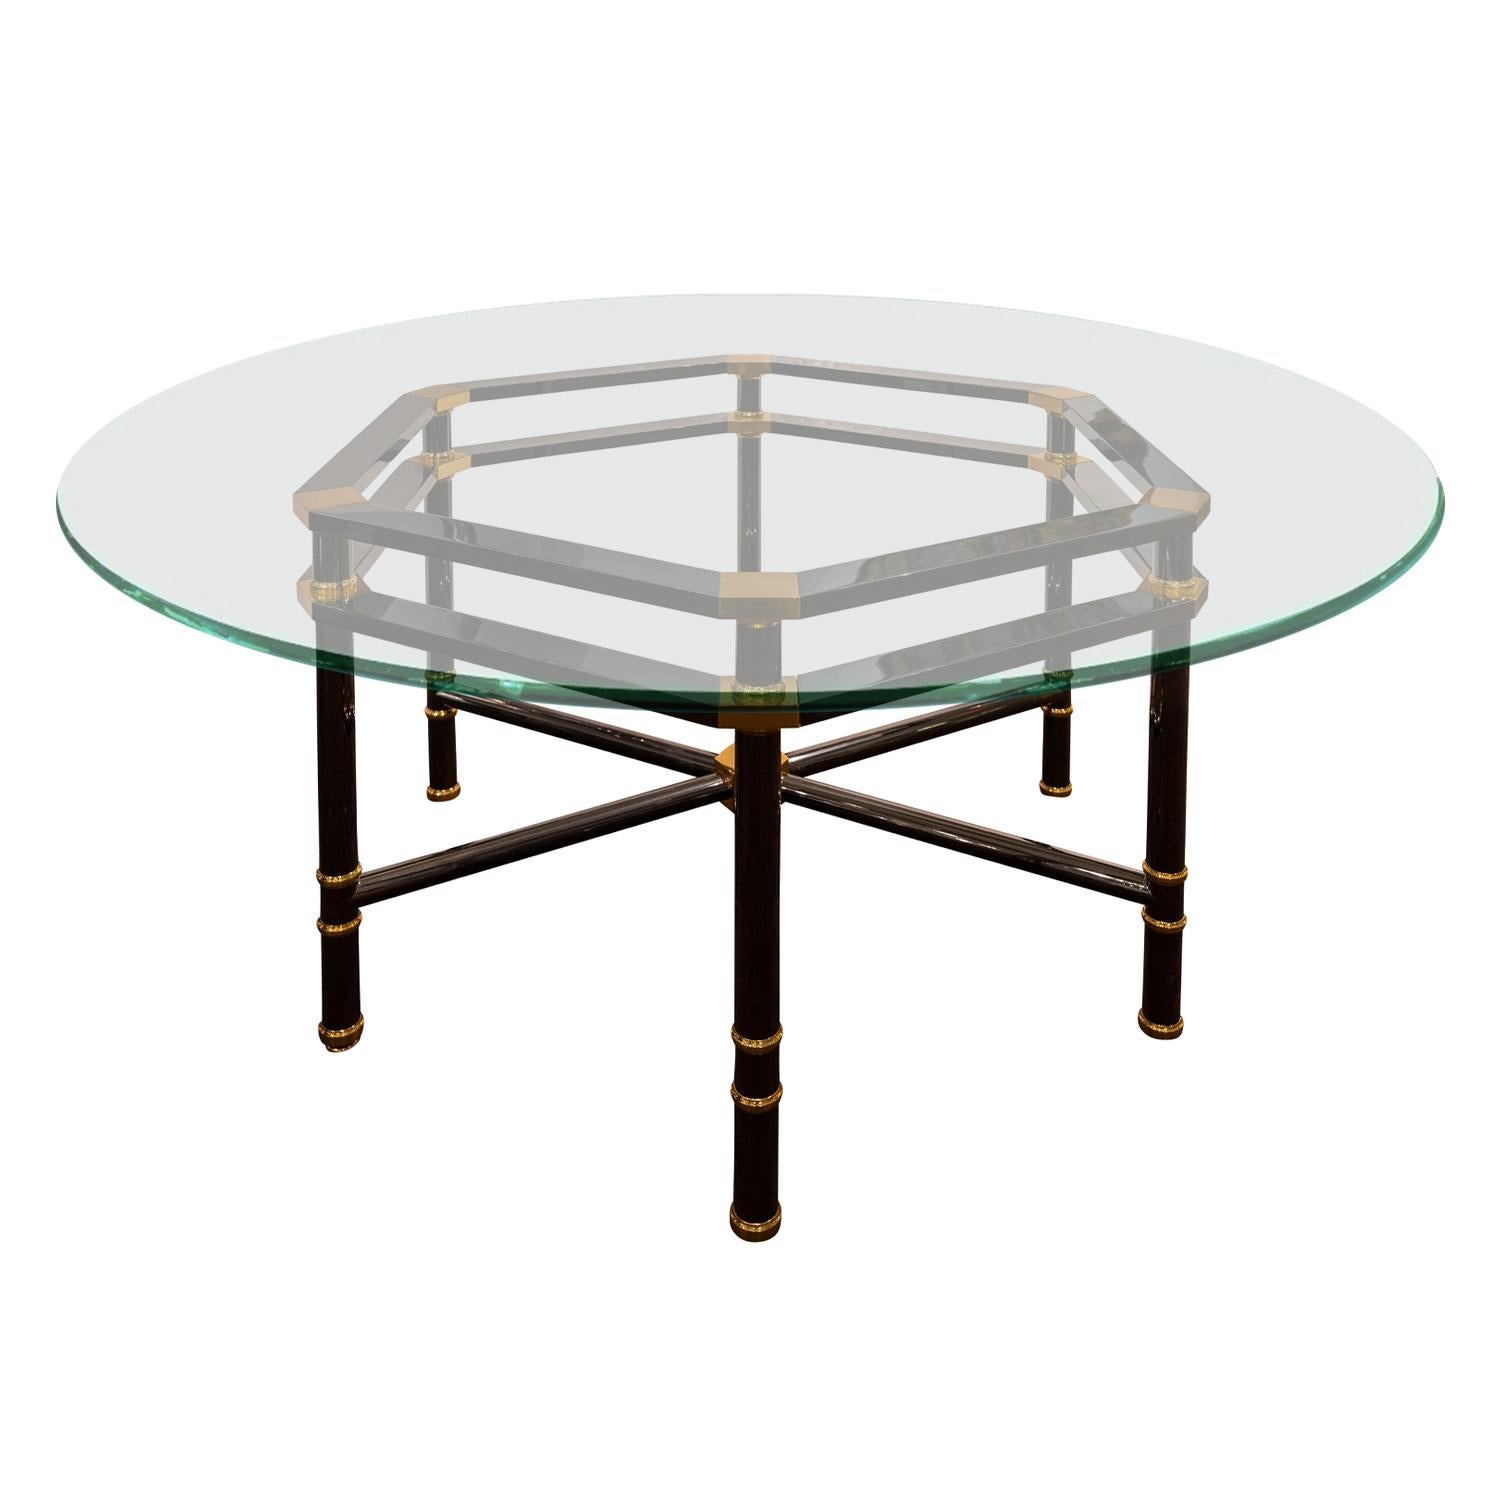 Modern Karl Springer Jansen Style Dining Table in Polished Gunmetal and Brass 1980s For Sale